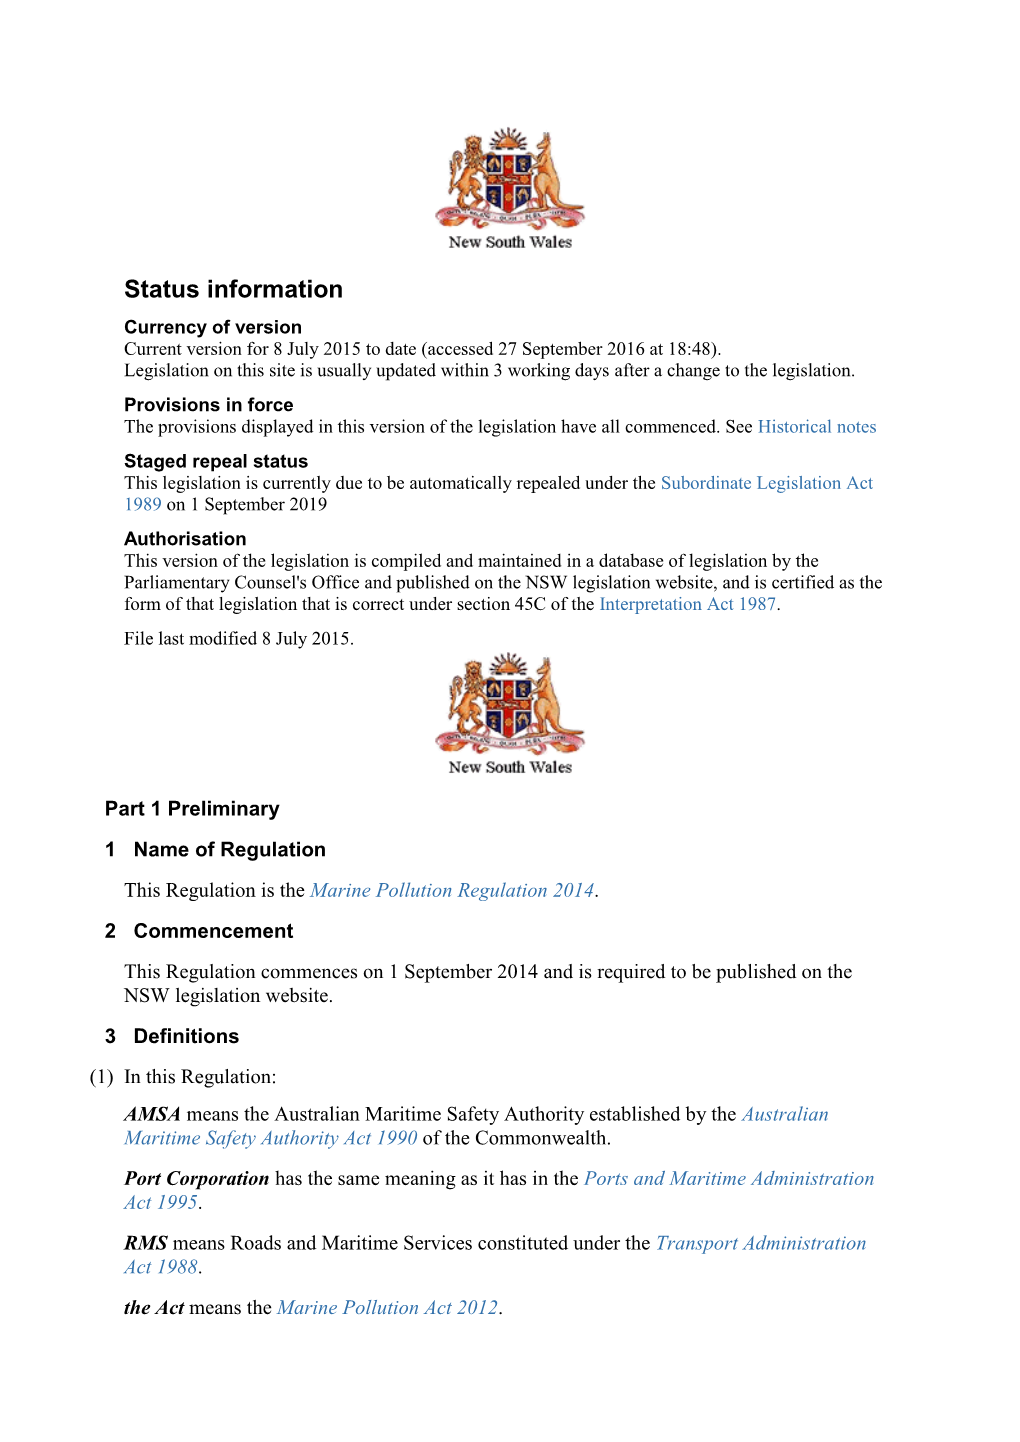 Marine Pollution Regulation 2014. 2 Commencement This Regulation Commences on 1 September 2014 and Is Required to Be Published on the NSW Legislation Website